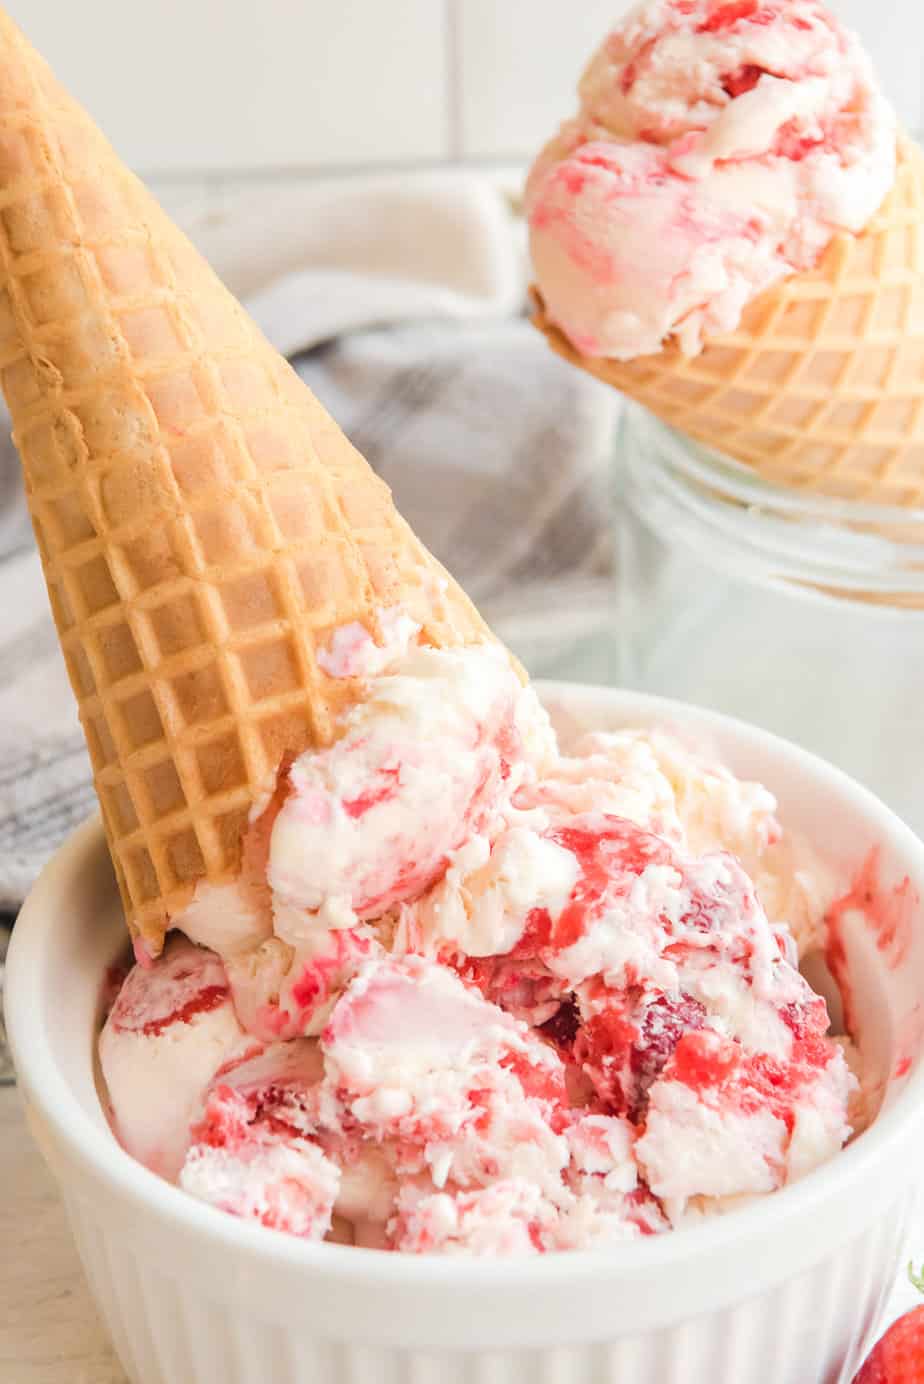 Strawberry swirl ice cream in a bowl with a cone on top and a strawberry ice cream filled cone in the background.